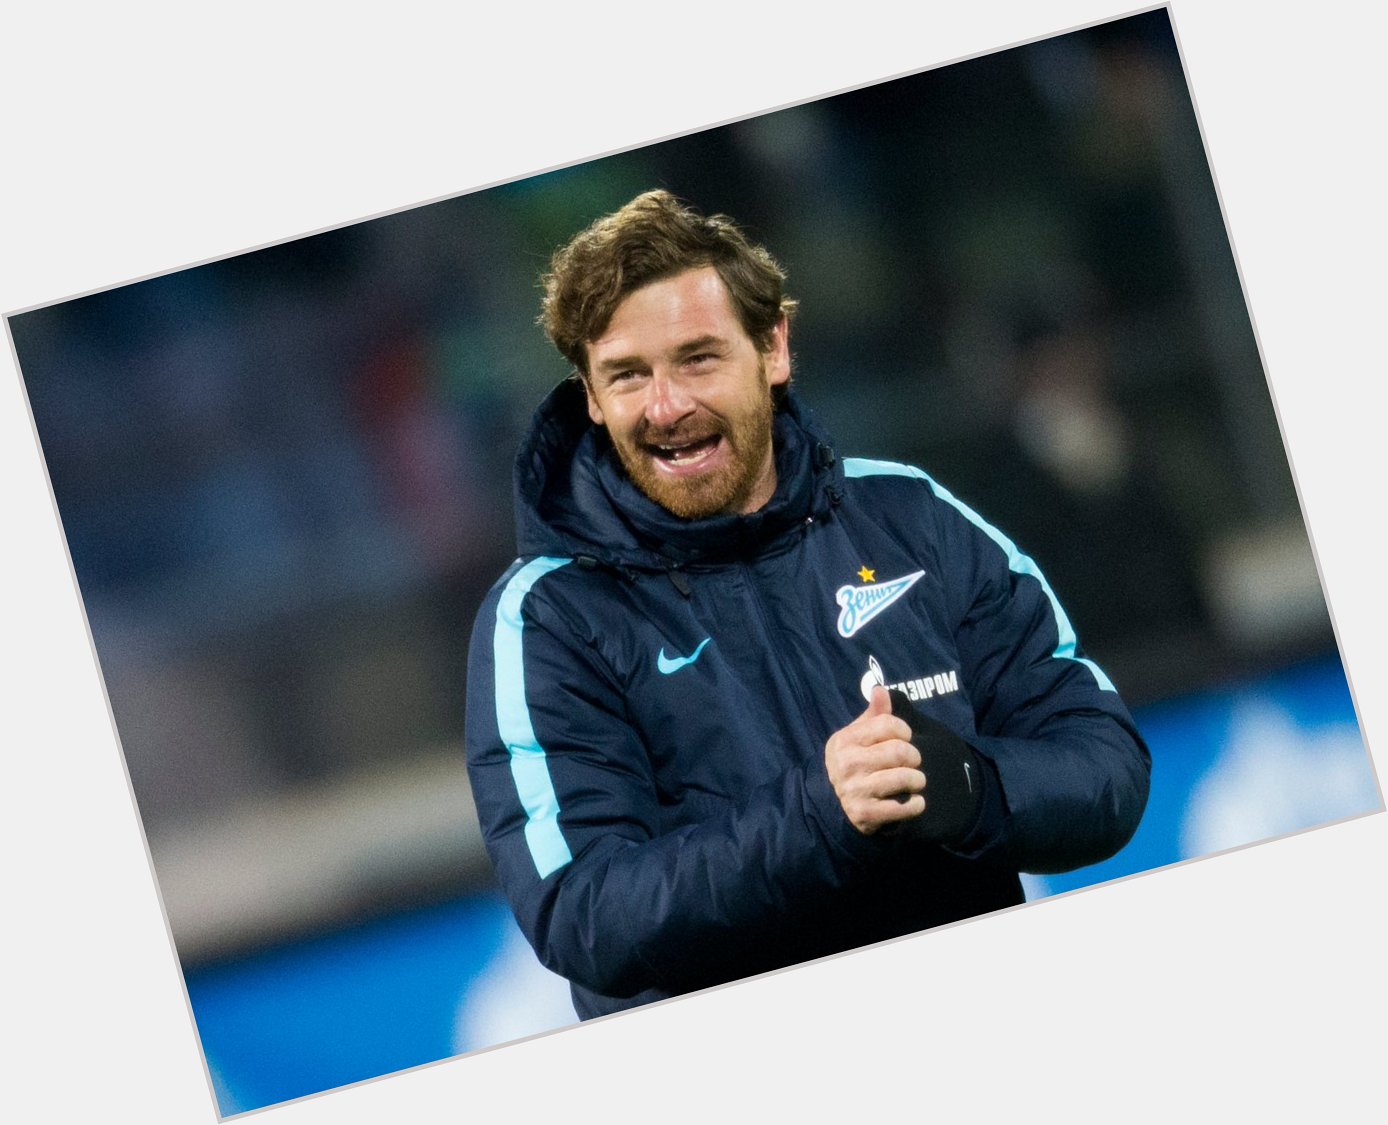 Happy birthday to our former manager André Villas-Boas. Have a great day boss! 